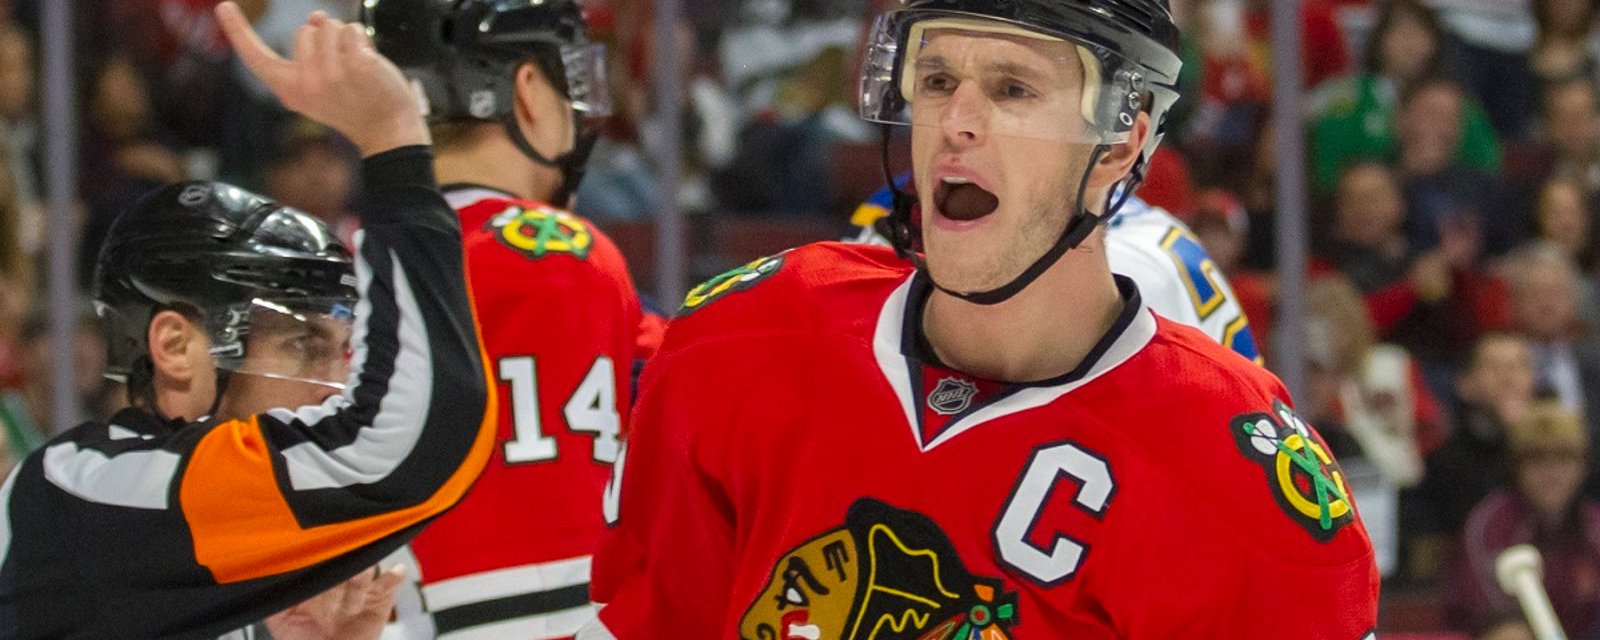 Jonathan Toews blasts NHL official after what he feels is a bad call.